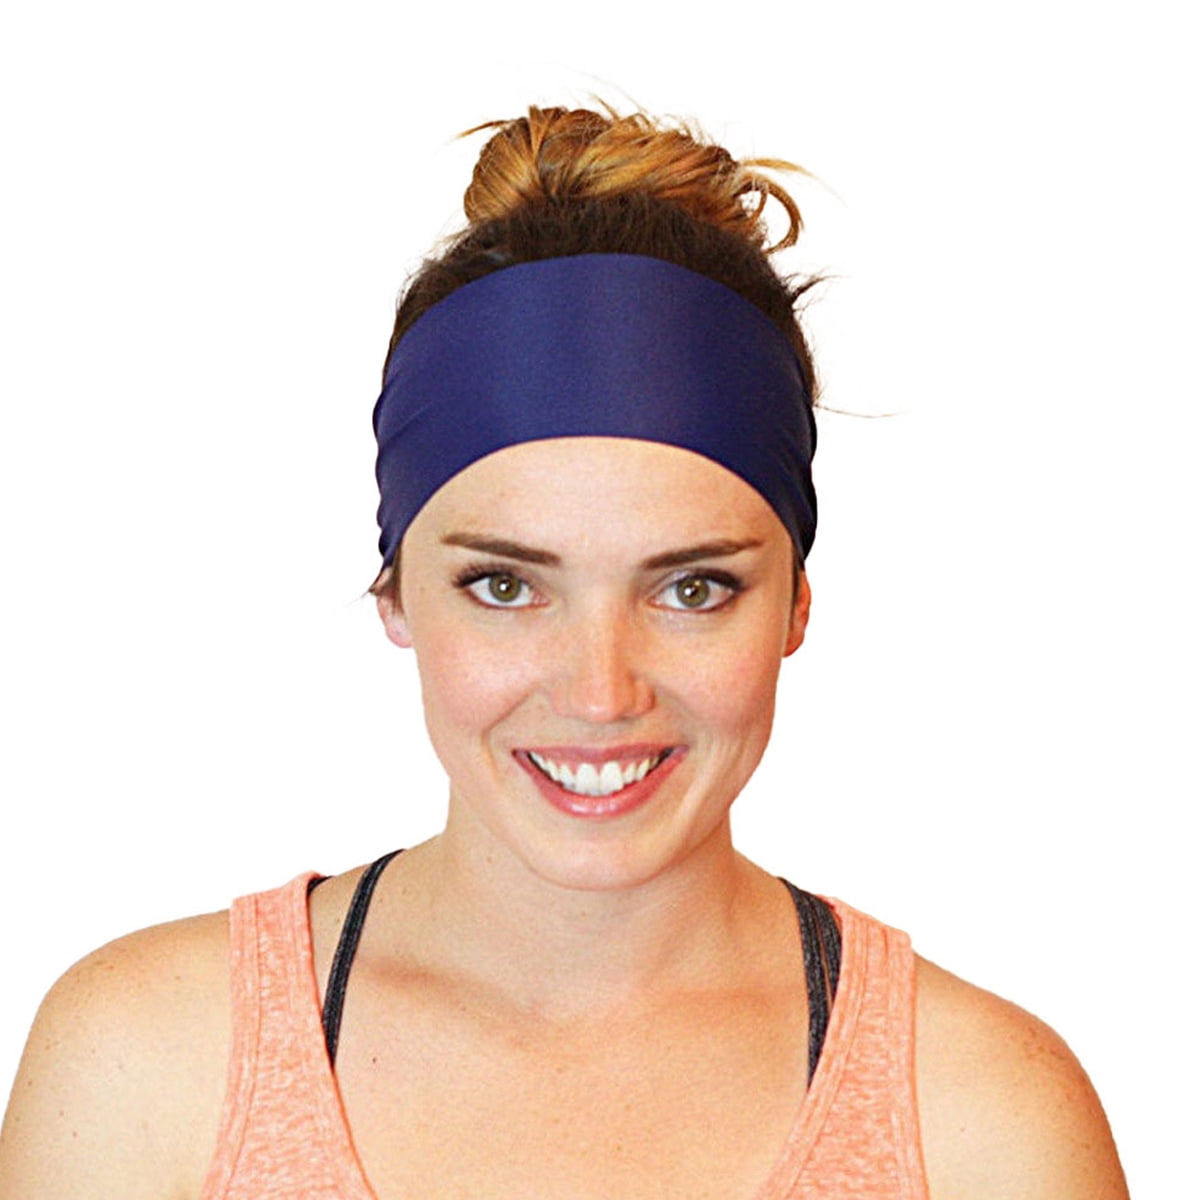 Details about   Sport Headbands Exercise Bands Sweat Bands Hair Bands Elastic Stretch Head Wraps